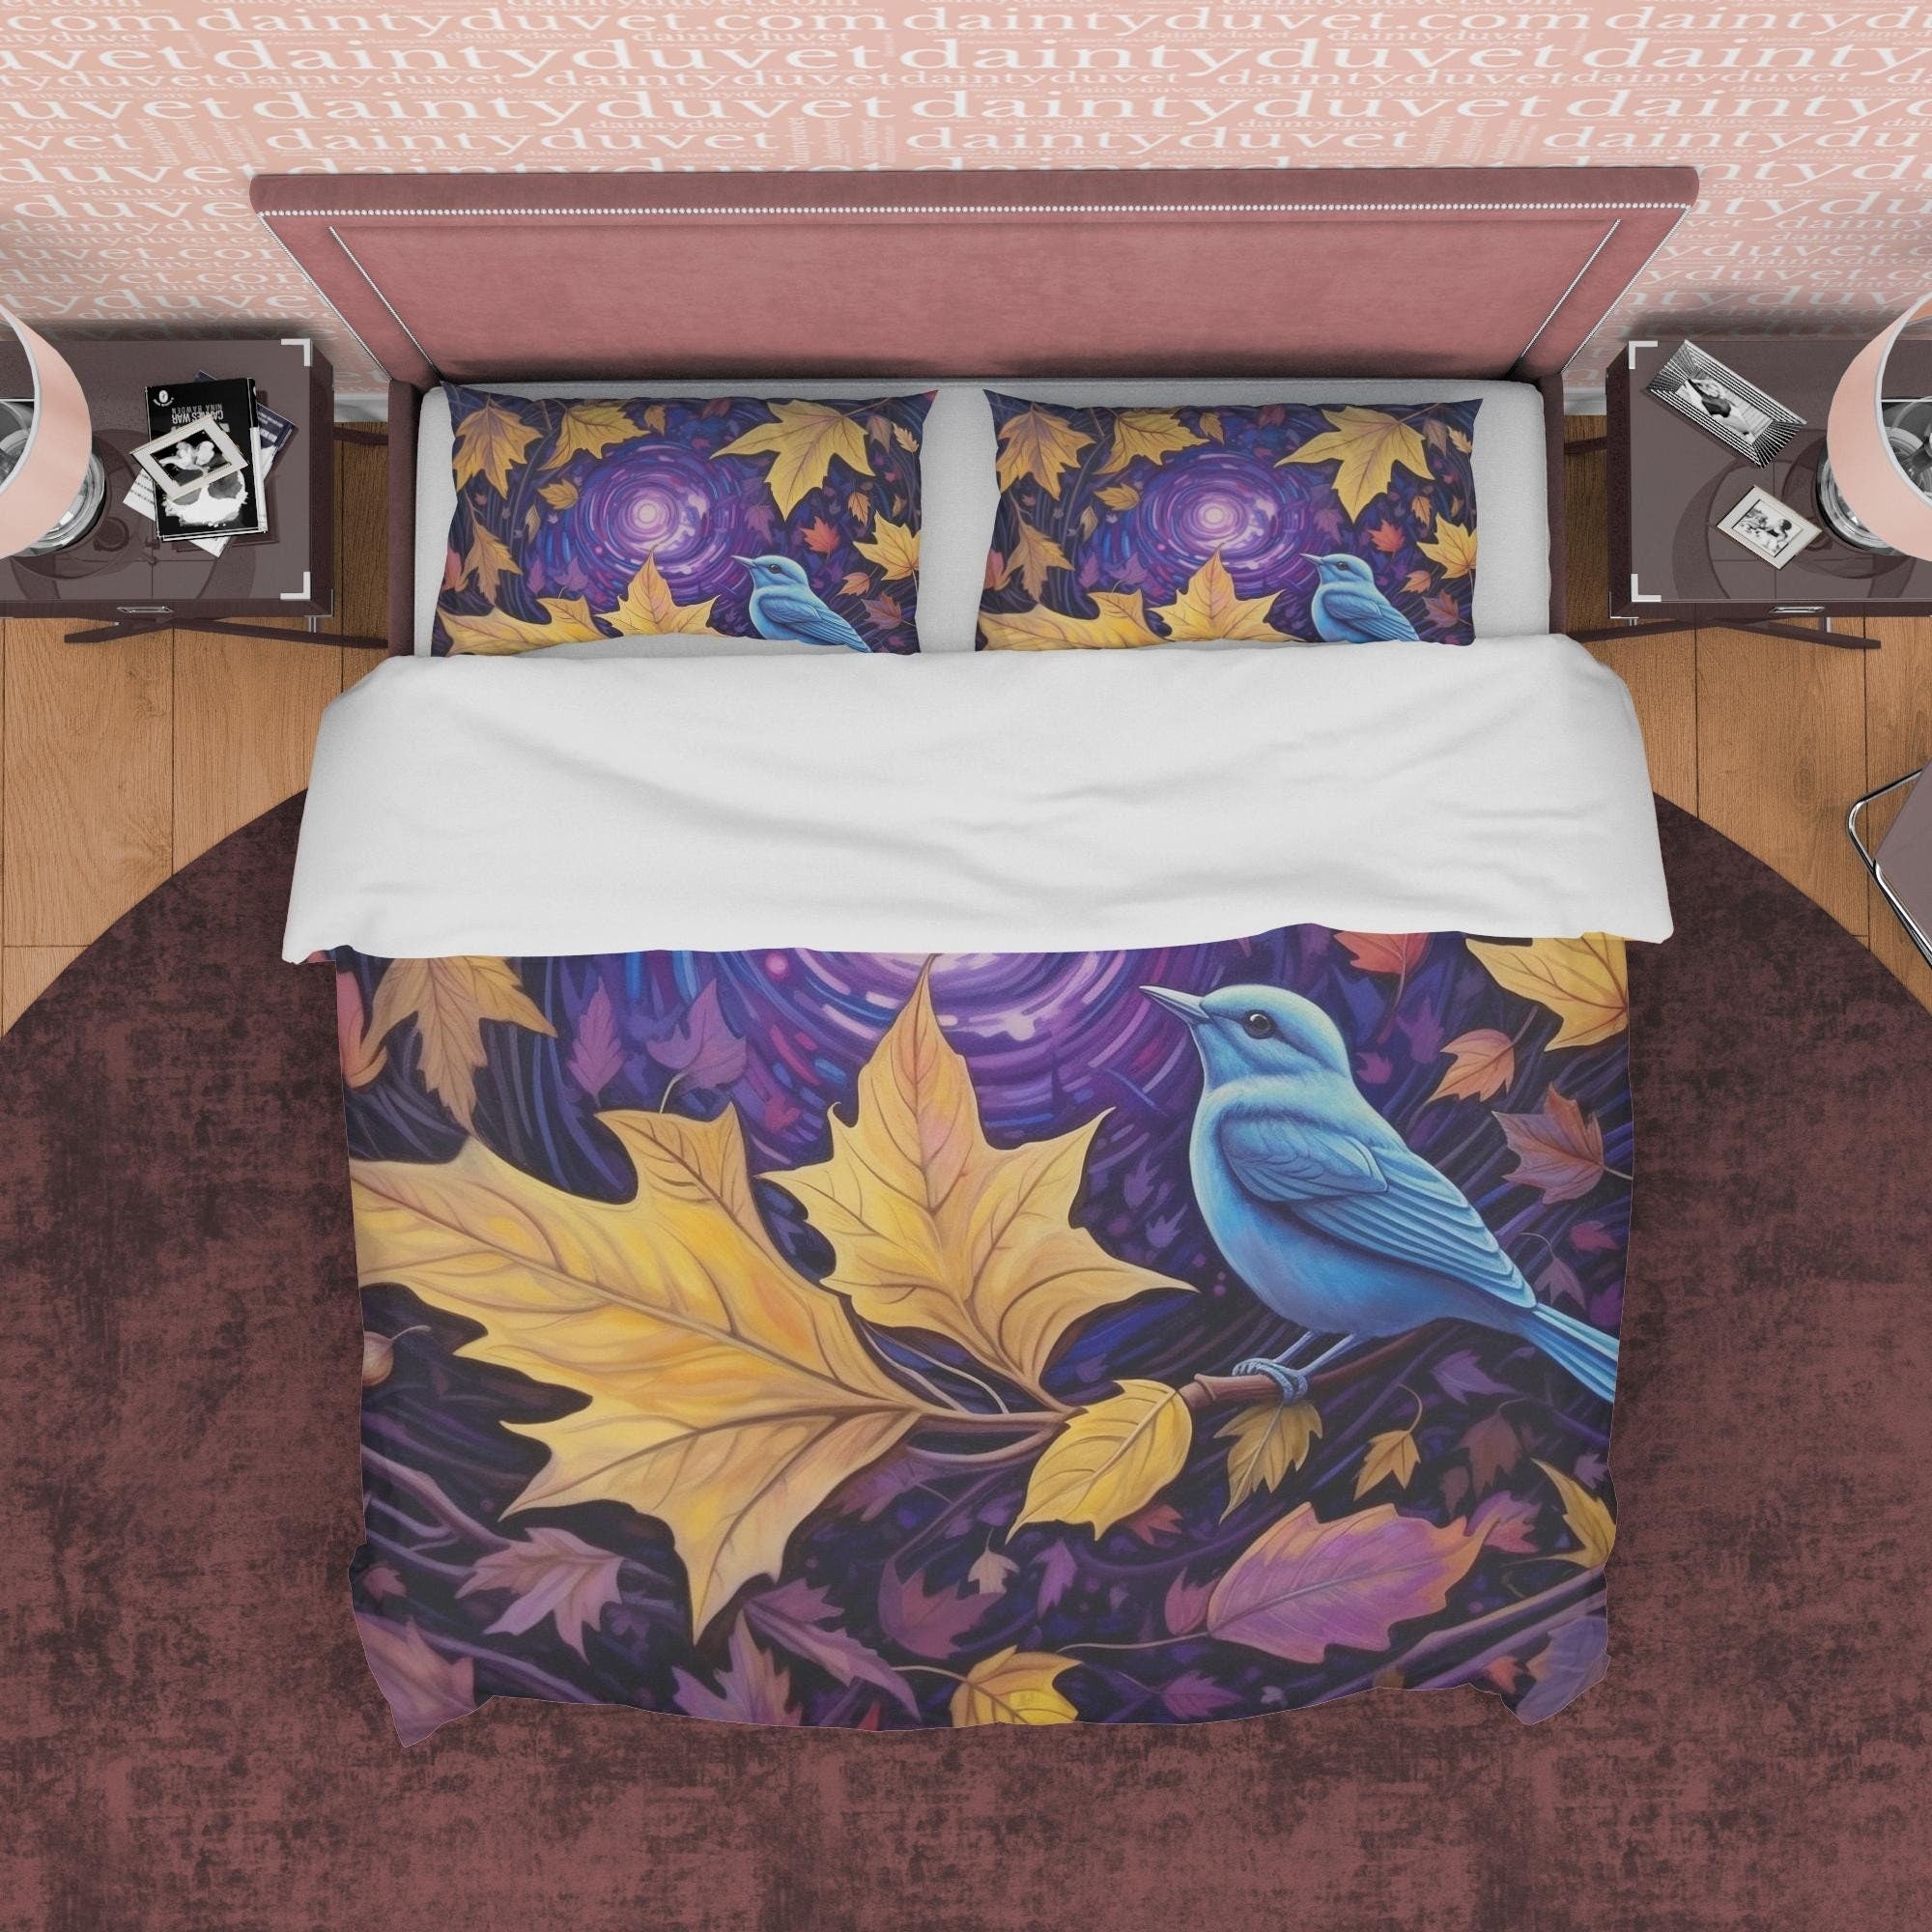 Blue Bird Fall Duvet Cover Purple Bedding Set, Warm Autumn Colors Printed Quilt Cover, Foliage Bedspread, Windy Themed Blanket Cover